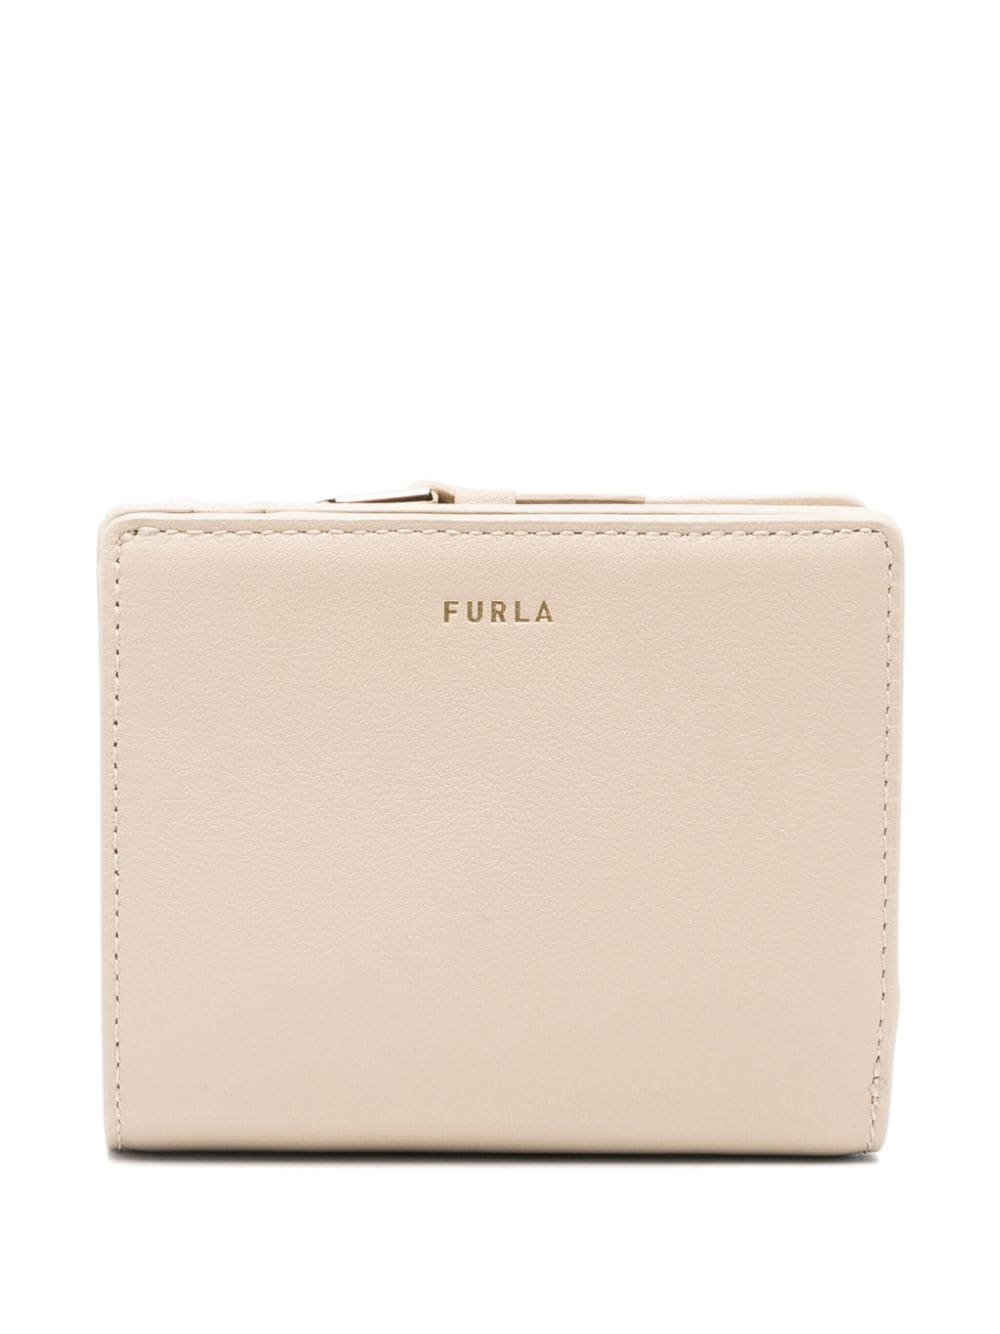 Furla Camelia Leather Wallet In Neutral